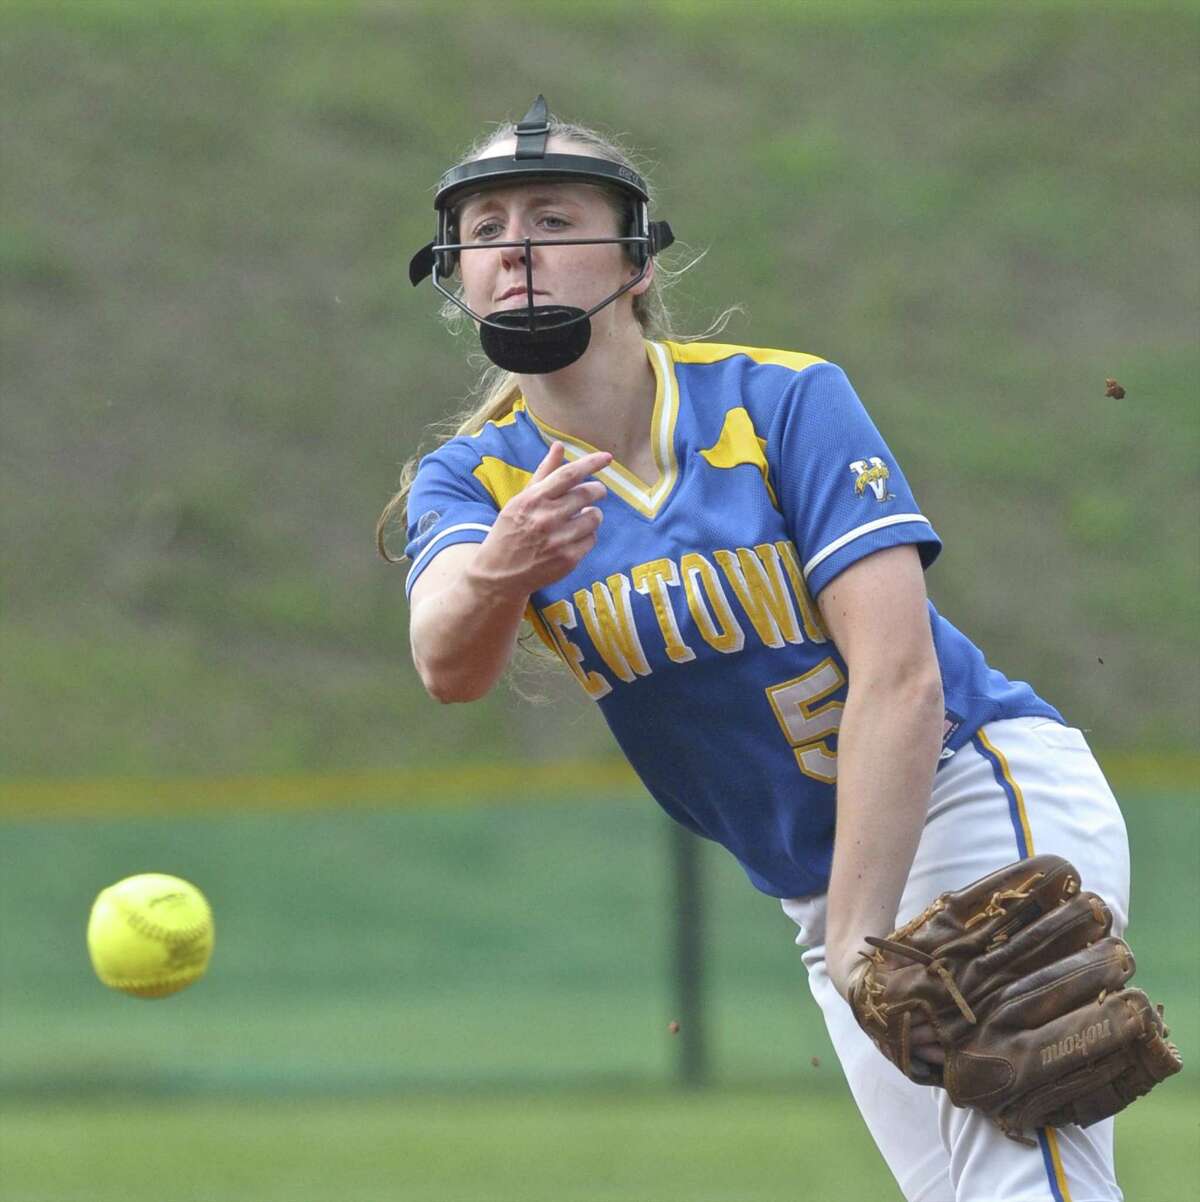 Newtown pitcher Sara Kennedy (5) during the SWC softball game between Newtown and Joel Barlow high schools on Friday afternoon, April 22, 2016, at Joel Barlow High School, in Redding, Conn.